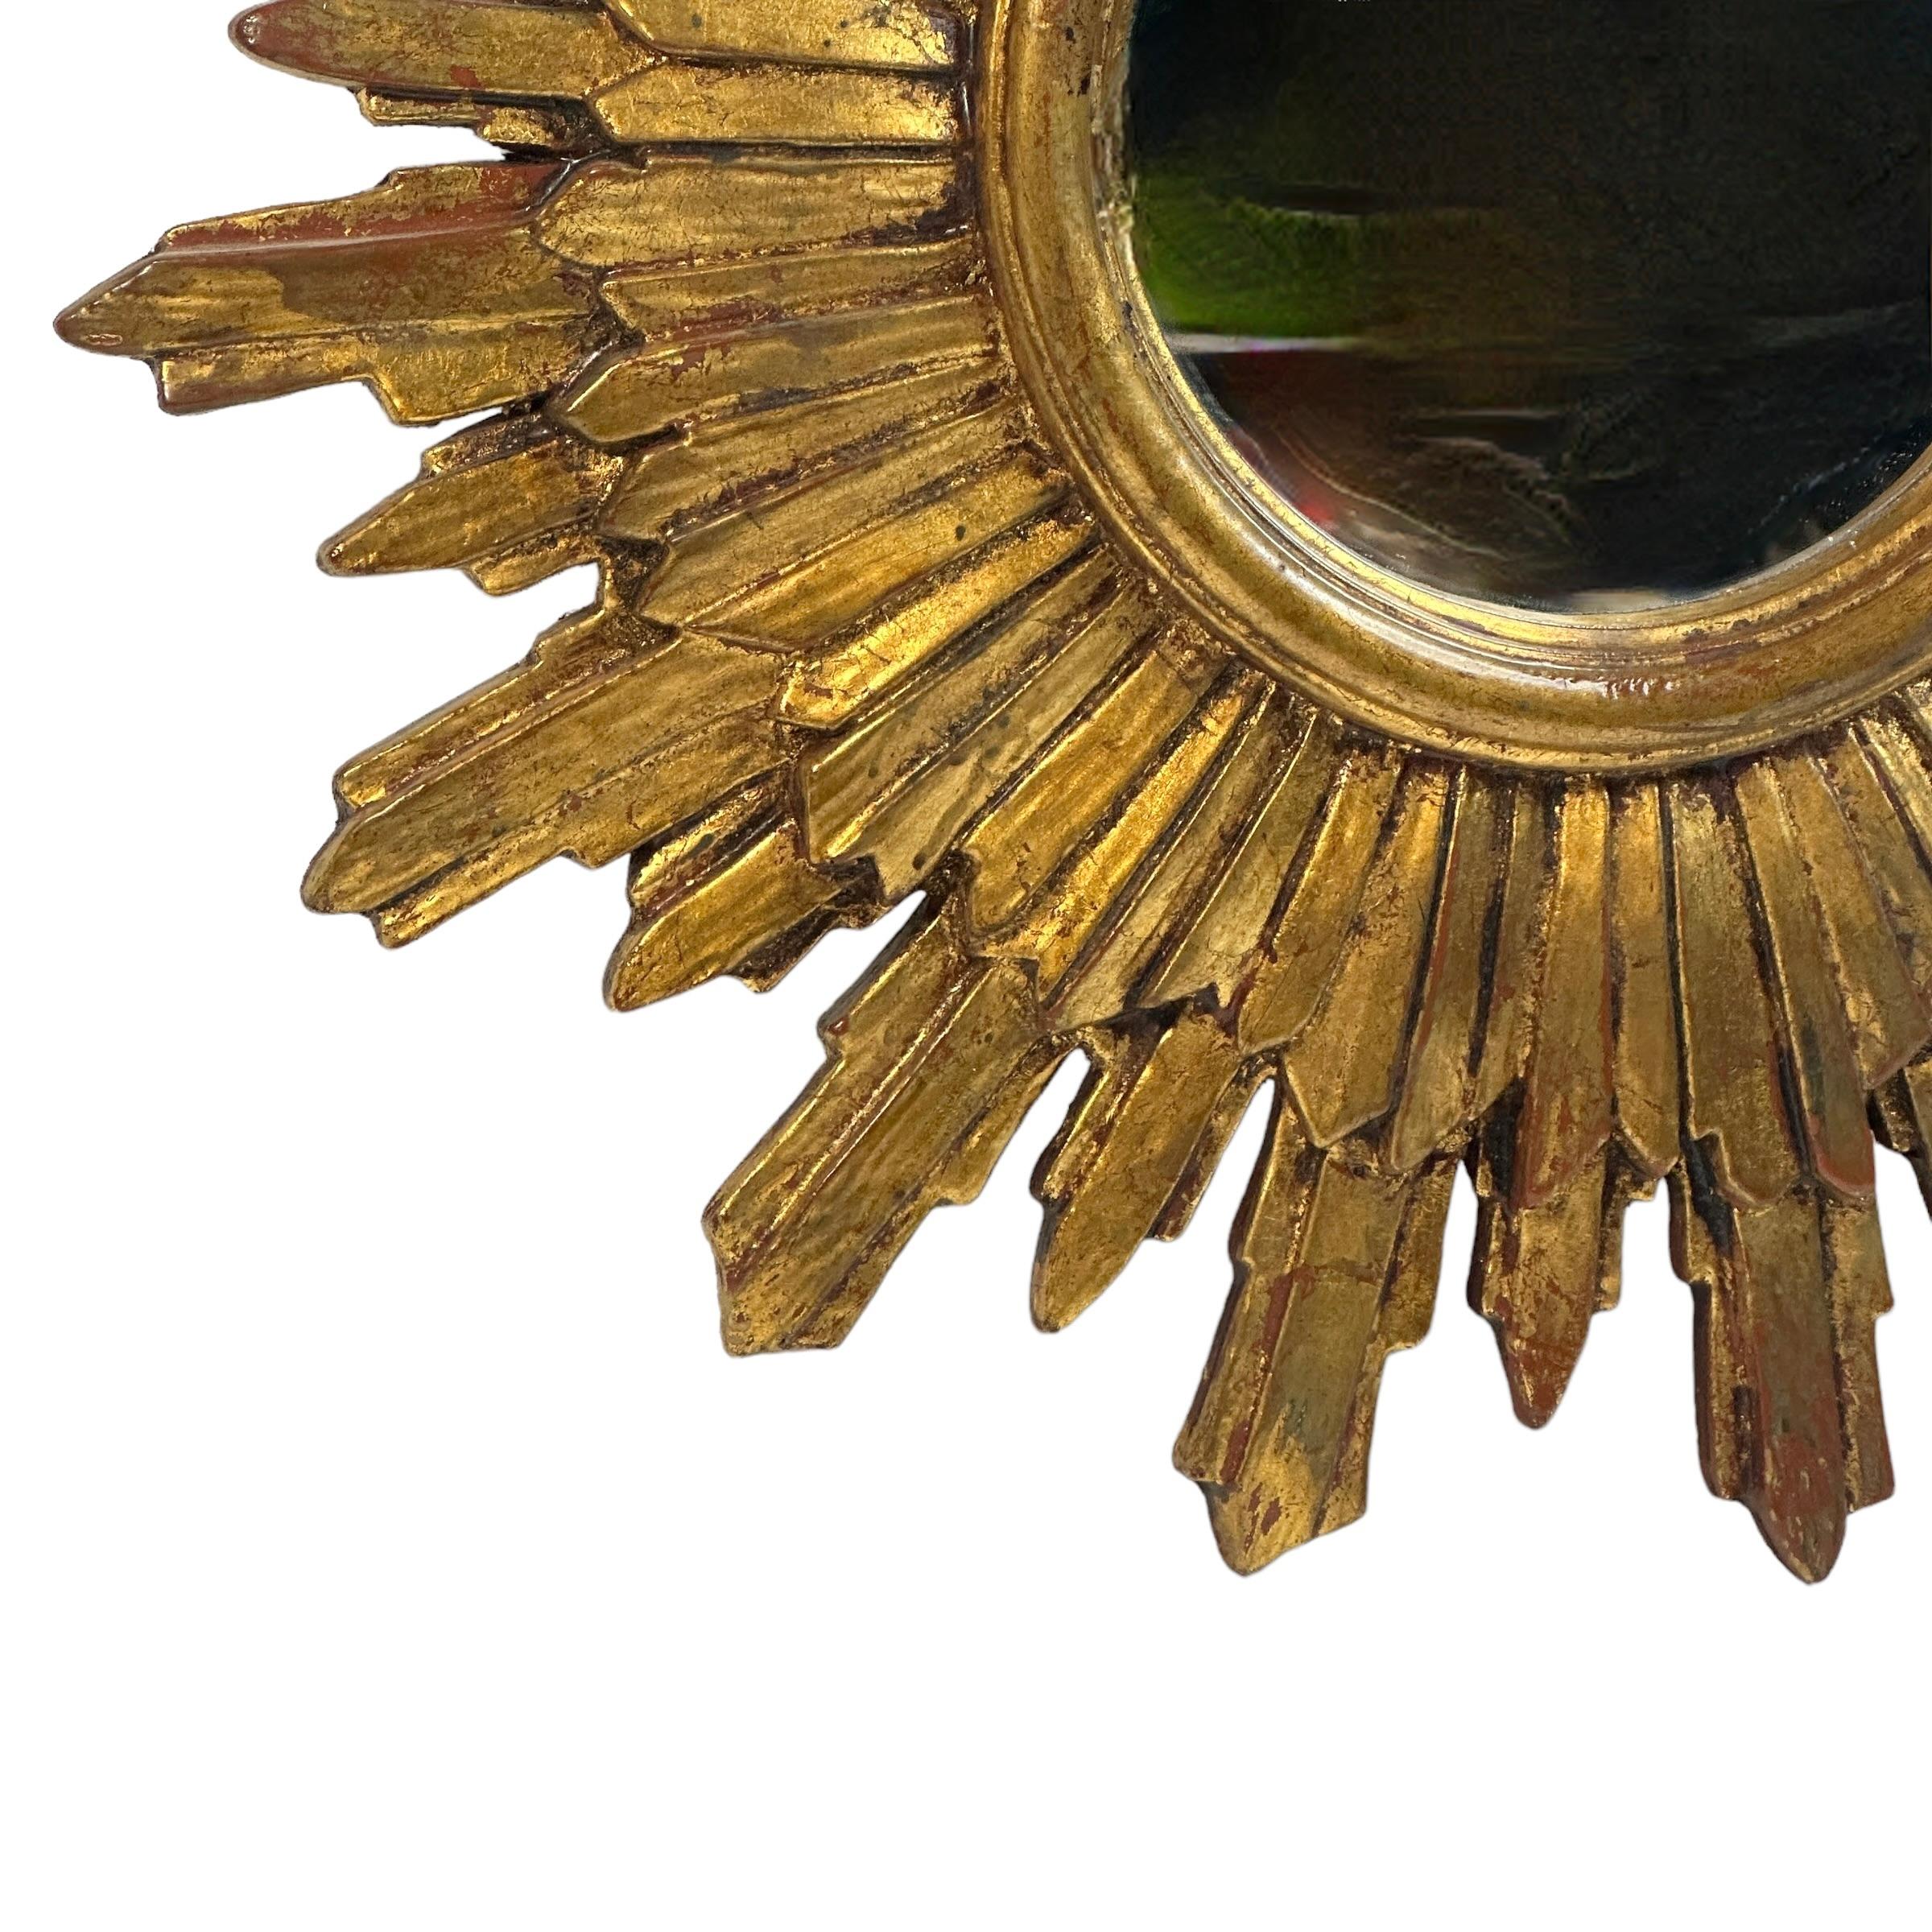 A beautiful starburst sunburst mirror. Made of gilded wood. It measures approximate 21.25